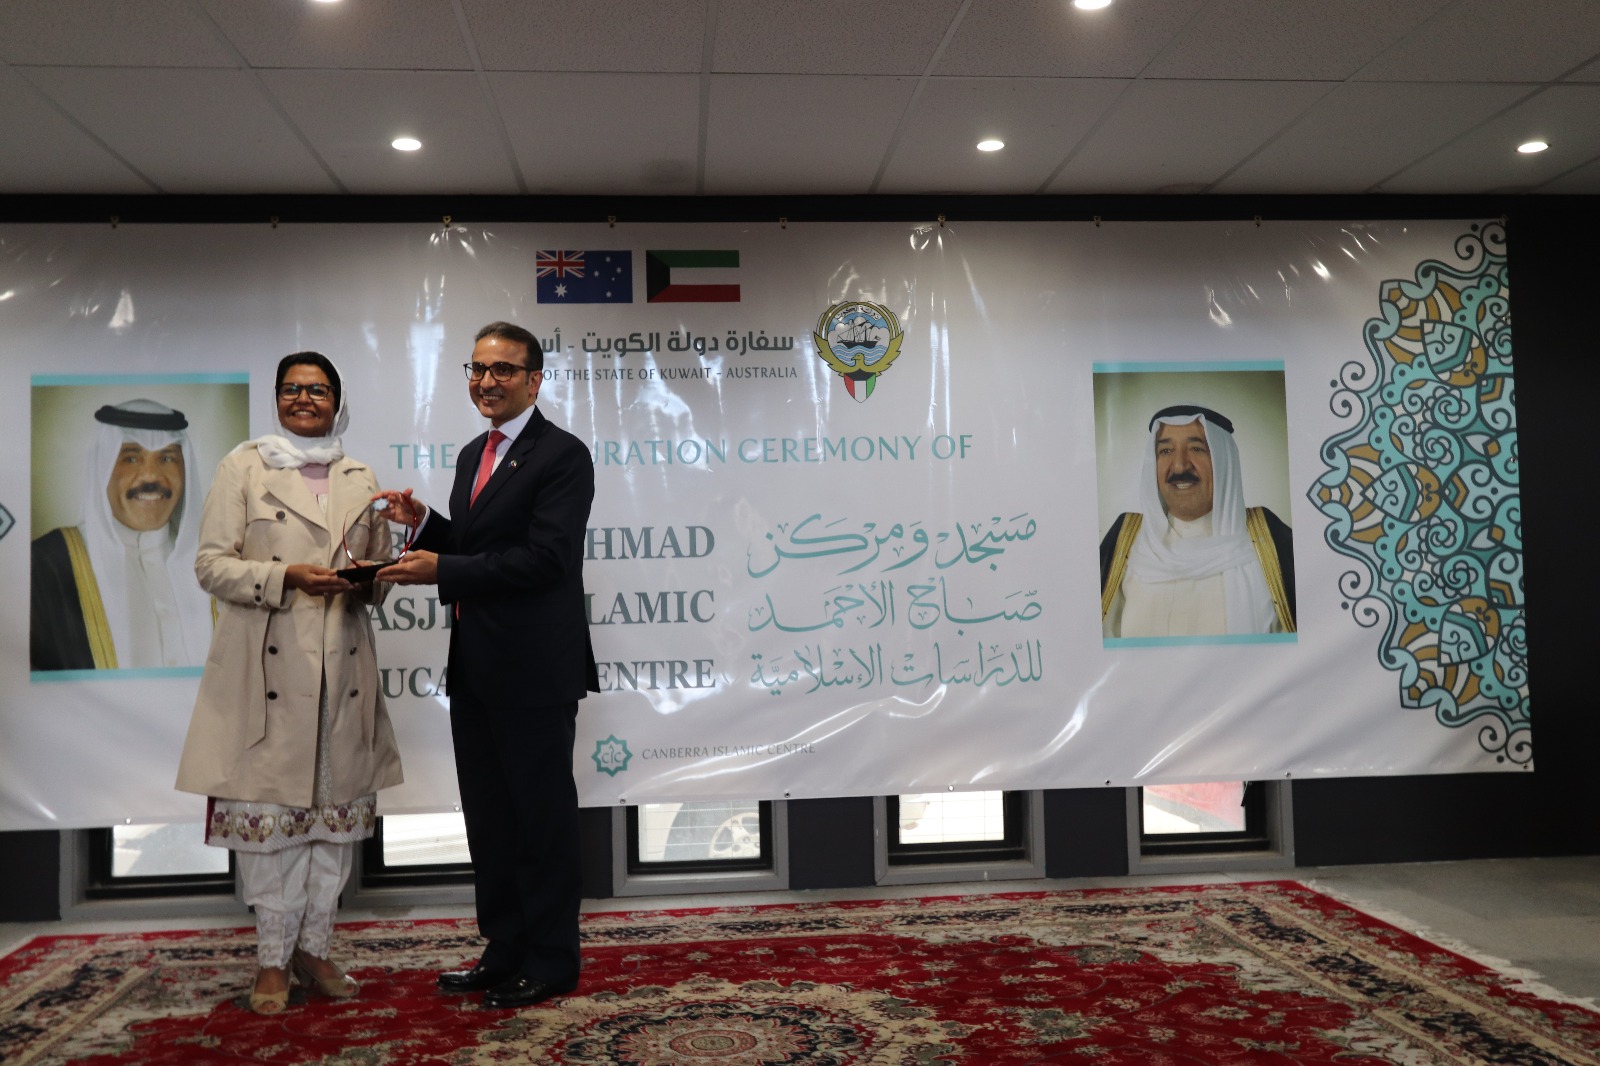 Sabah Al-Ahmed Masjid (Mosque) and Islamic Education Centre in Canberra Inauguration ceremony